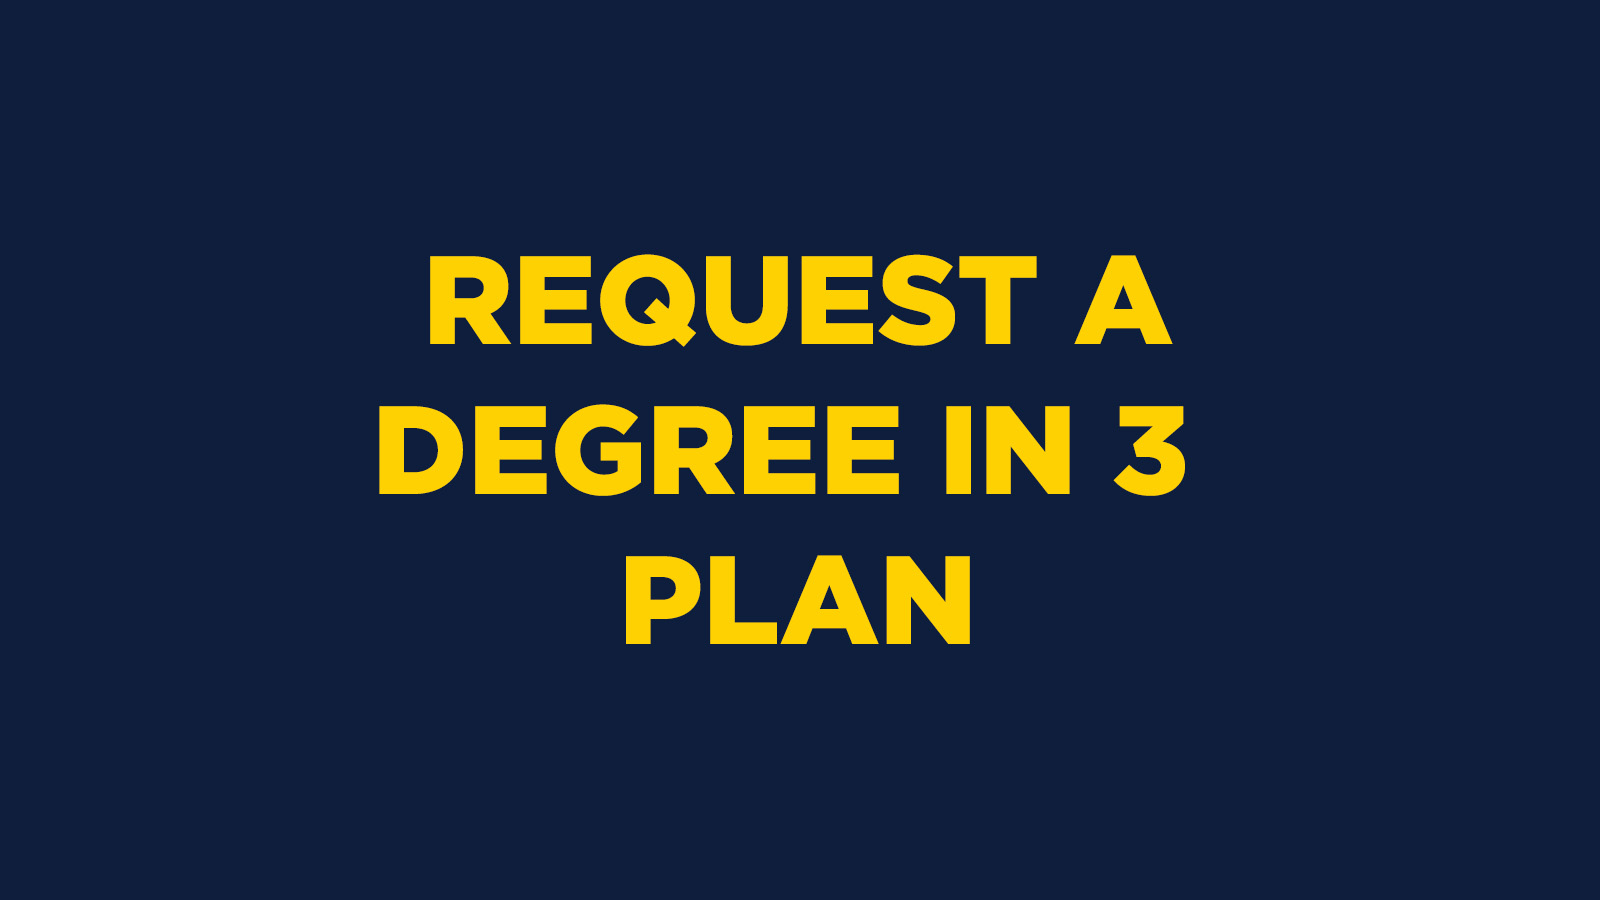 REQUEST A DEGREE IN 3 PLAN